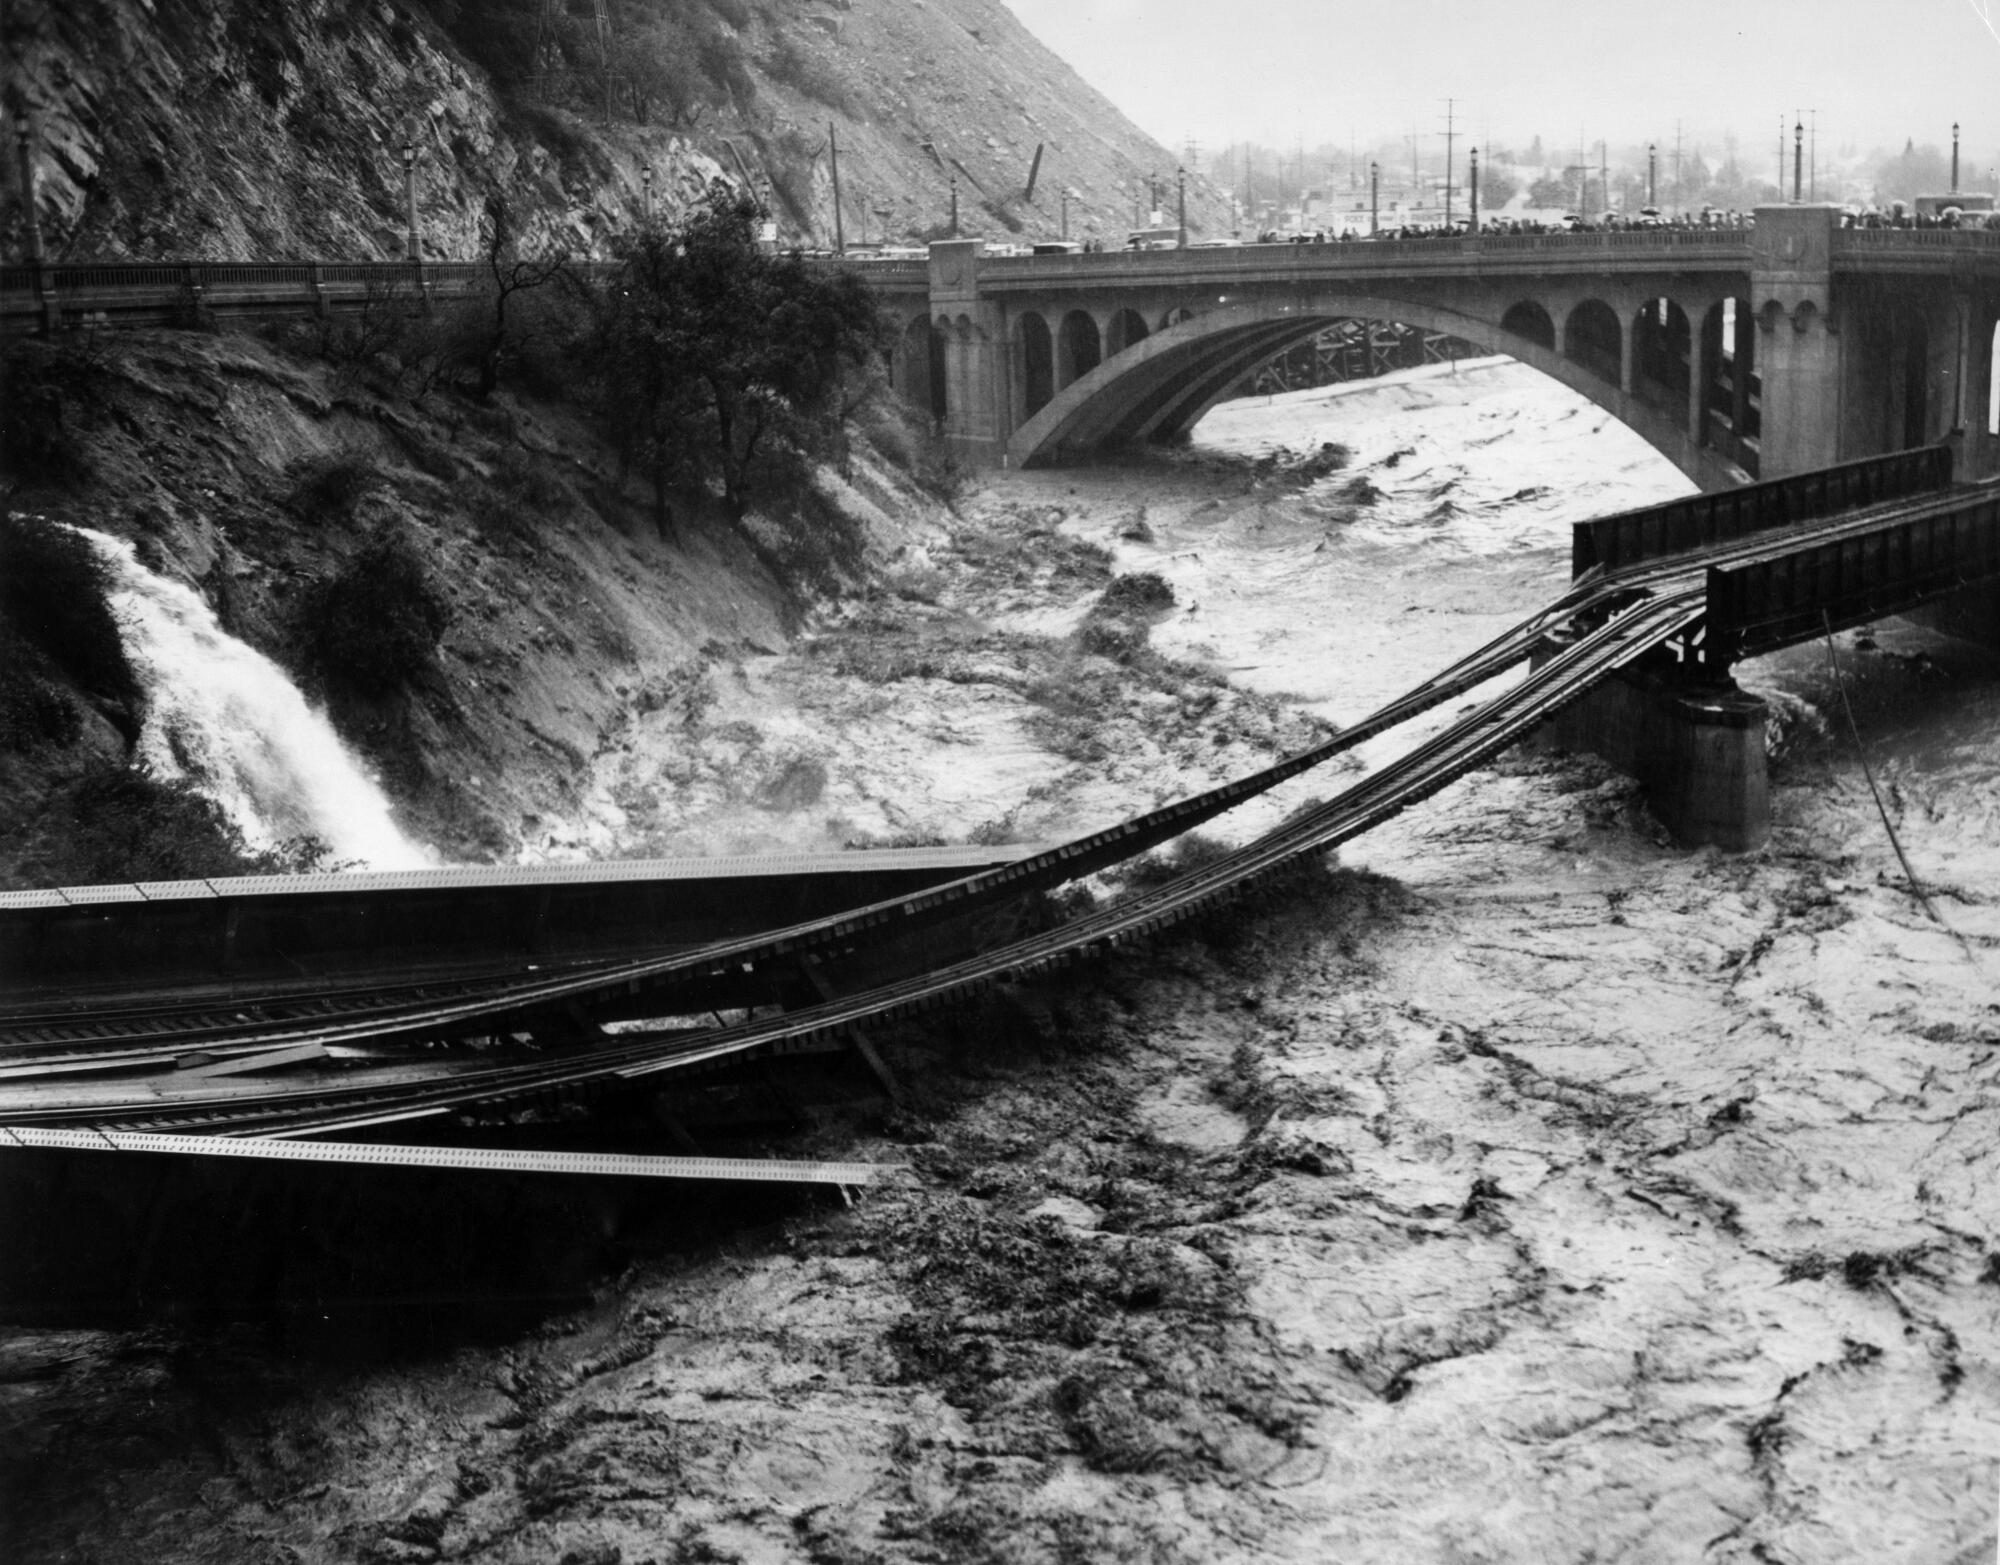 Remnants of a destroyed railroad bridge are suspended over a raging river.